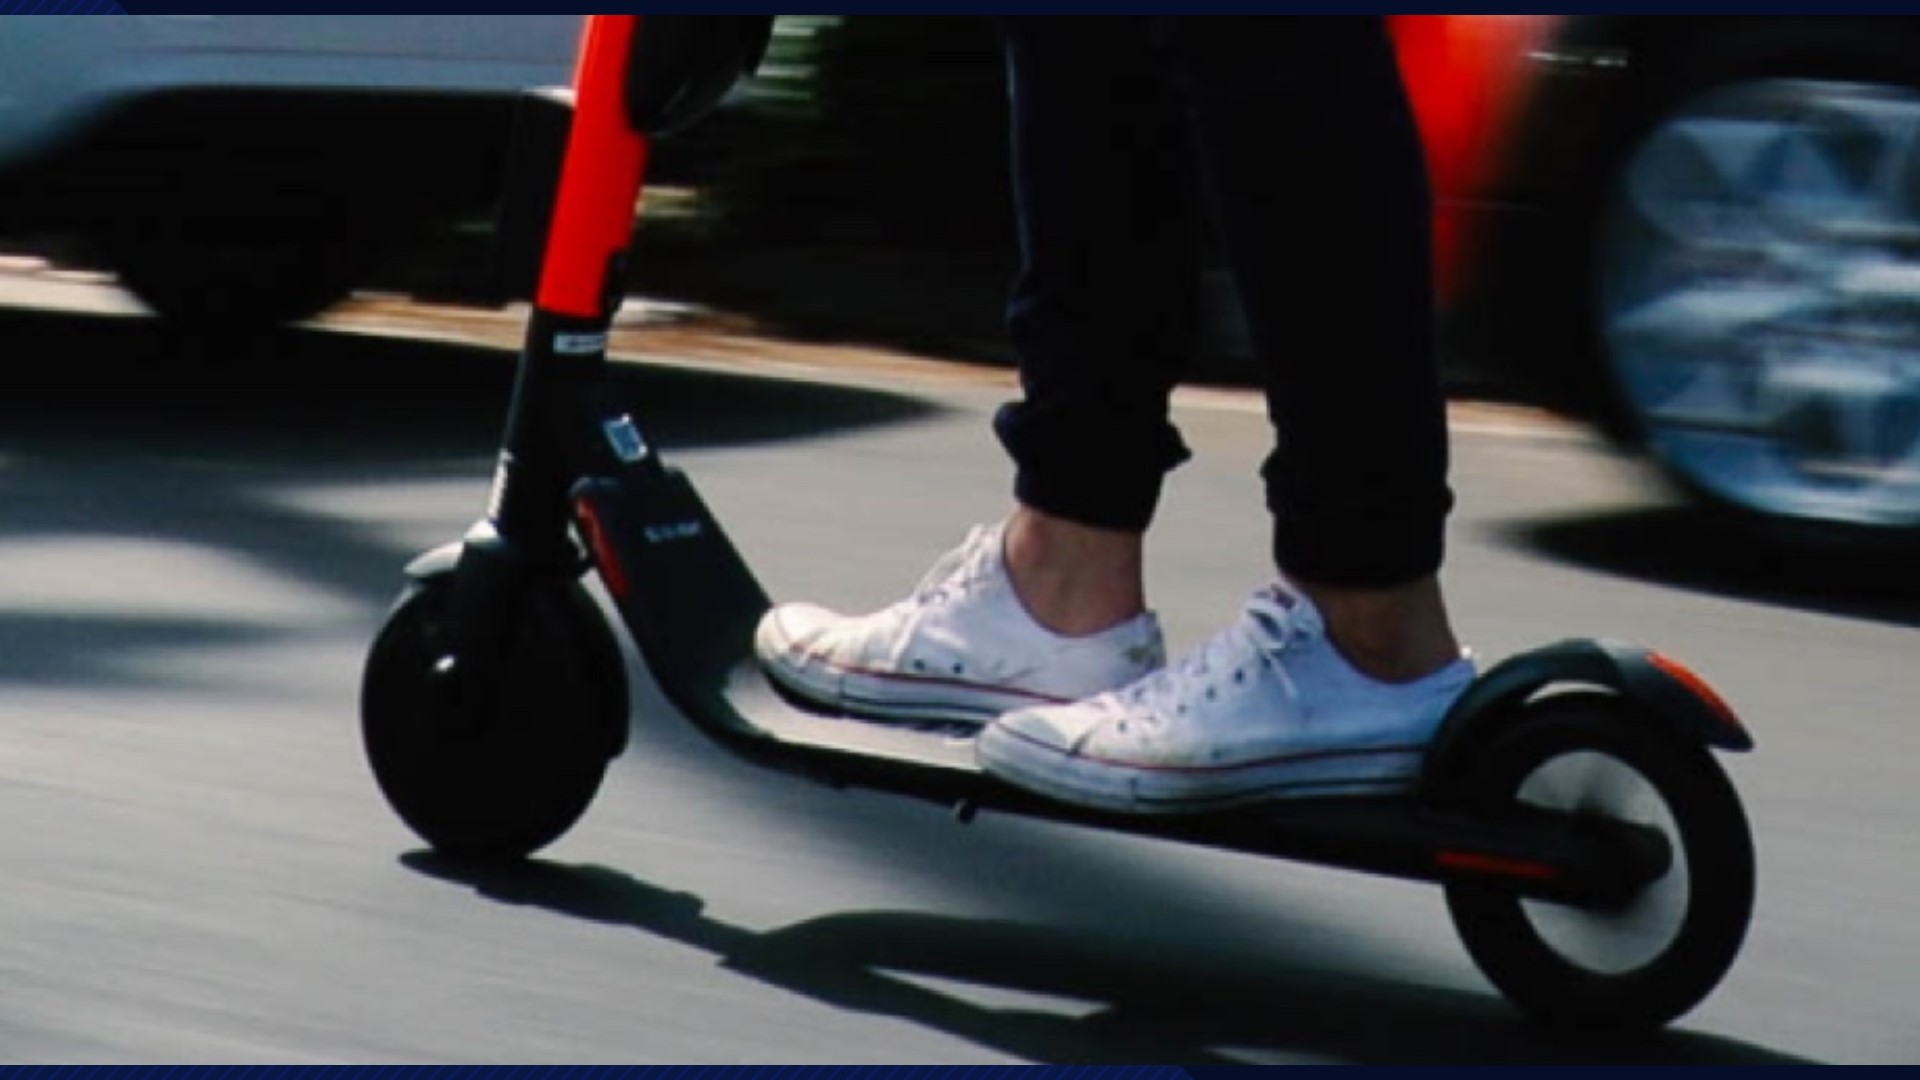 D.C. Councilmember Mary Cheh says she’s not an enemy of electric scooters in The District, but it’s time to properly regulate them. Tuesday, Cheh proposed a bill that would impose a host of new rules on the dockless vehicles that first showed up in the city almost two years ago.